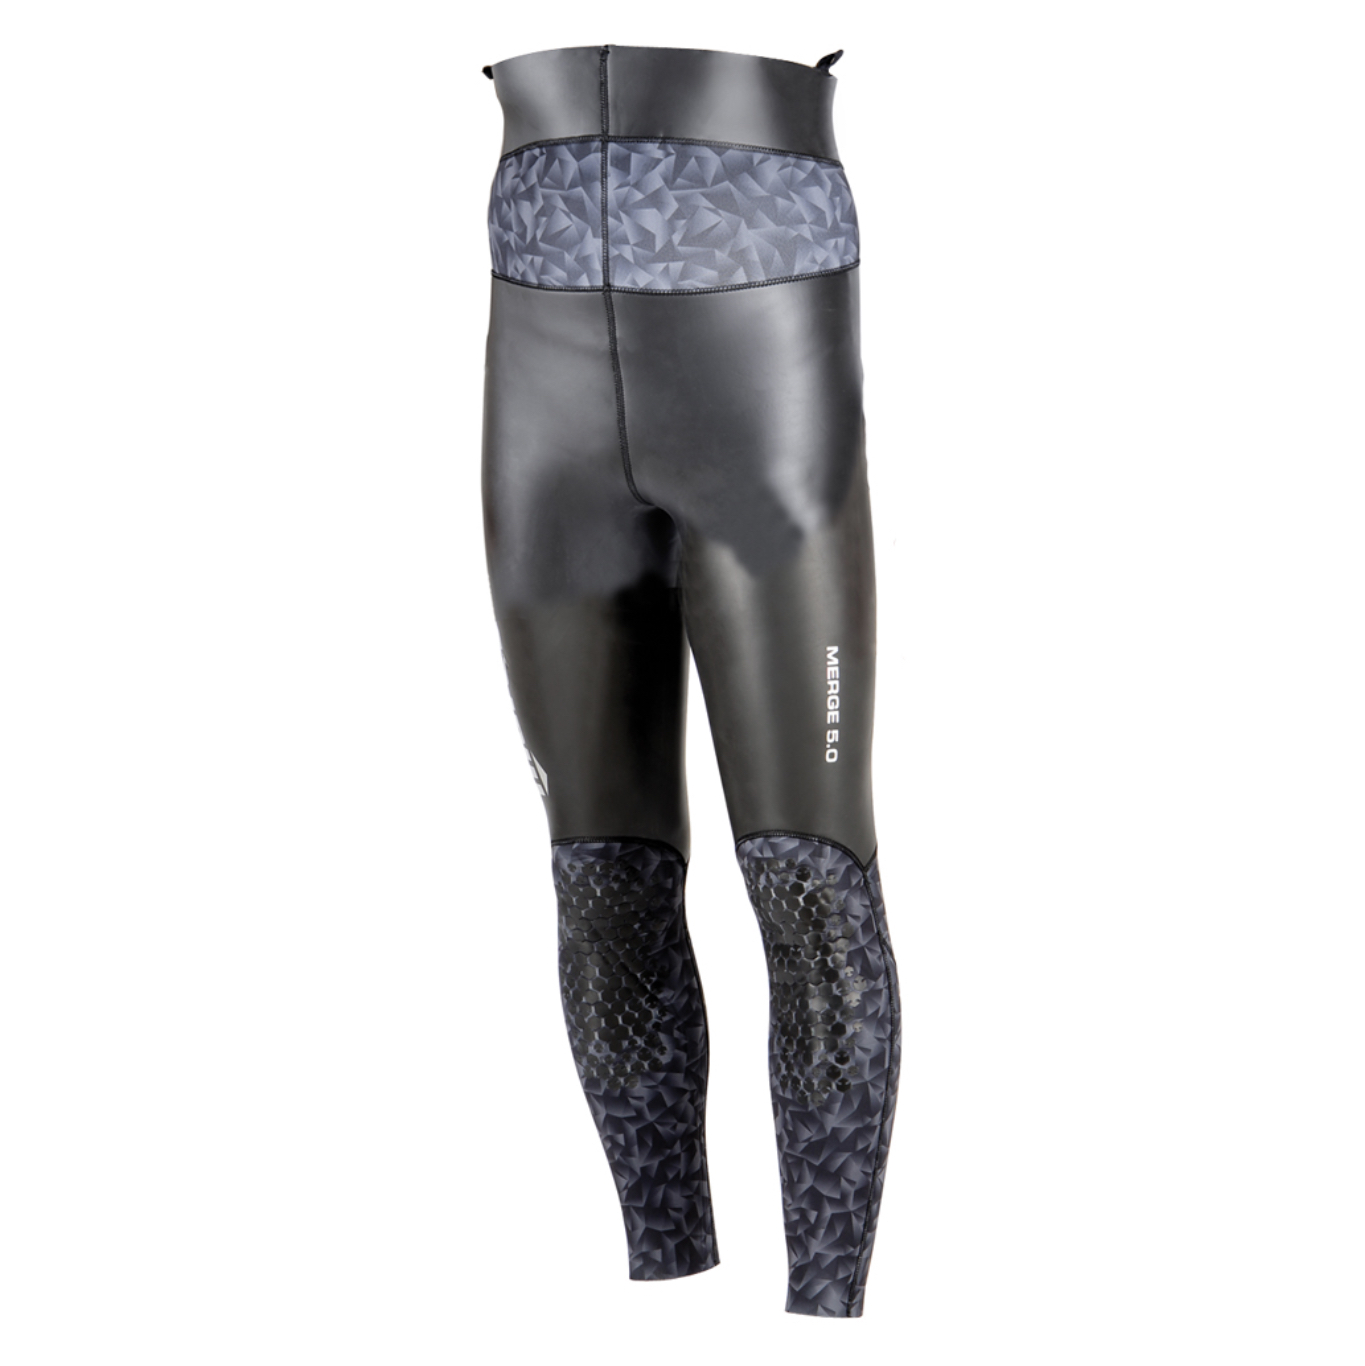 Mares Merge 50 Spearfishing Wetsuit Pants